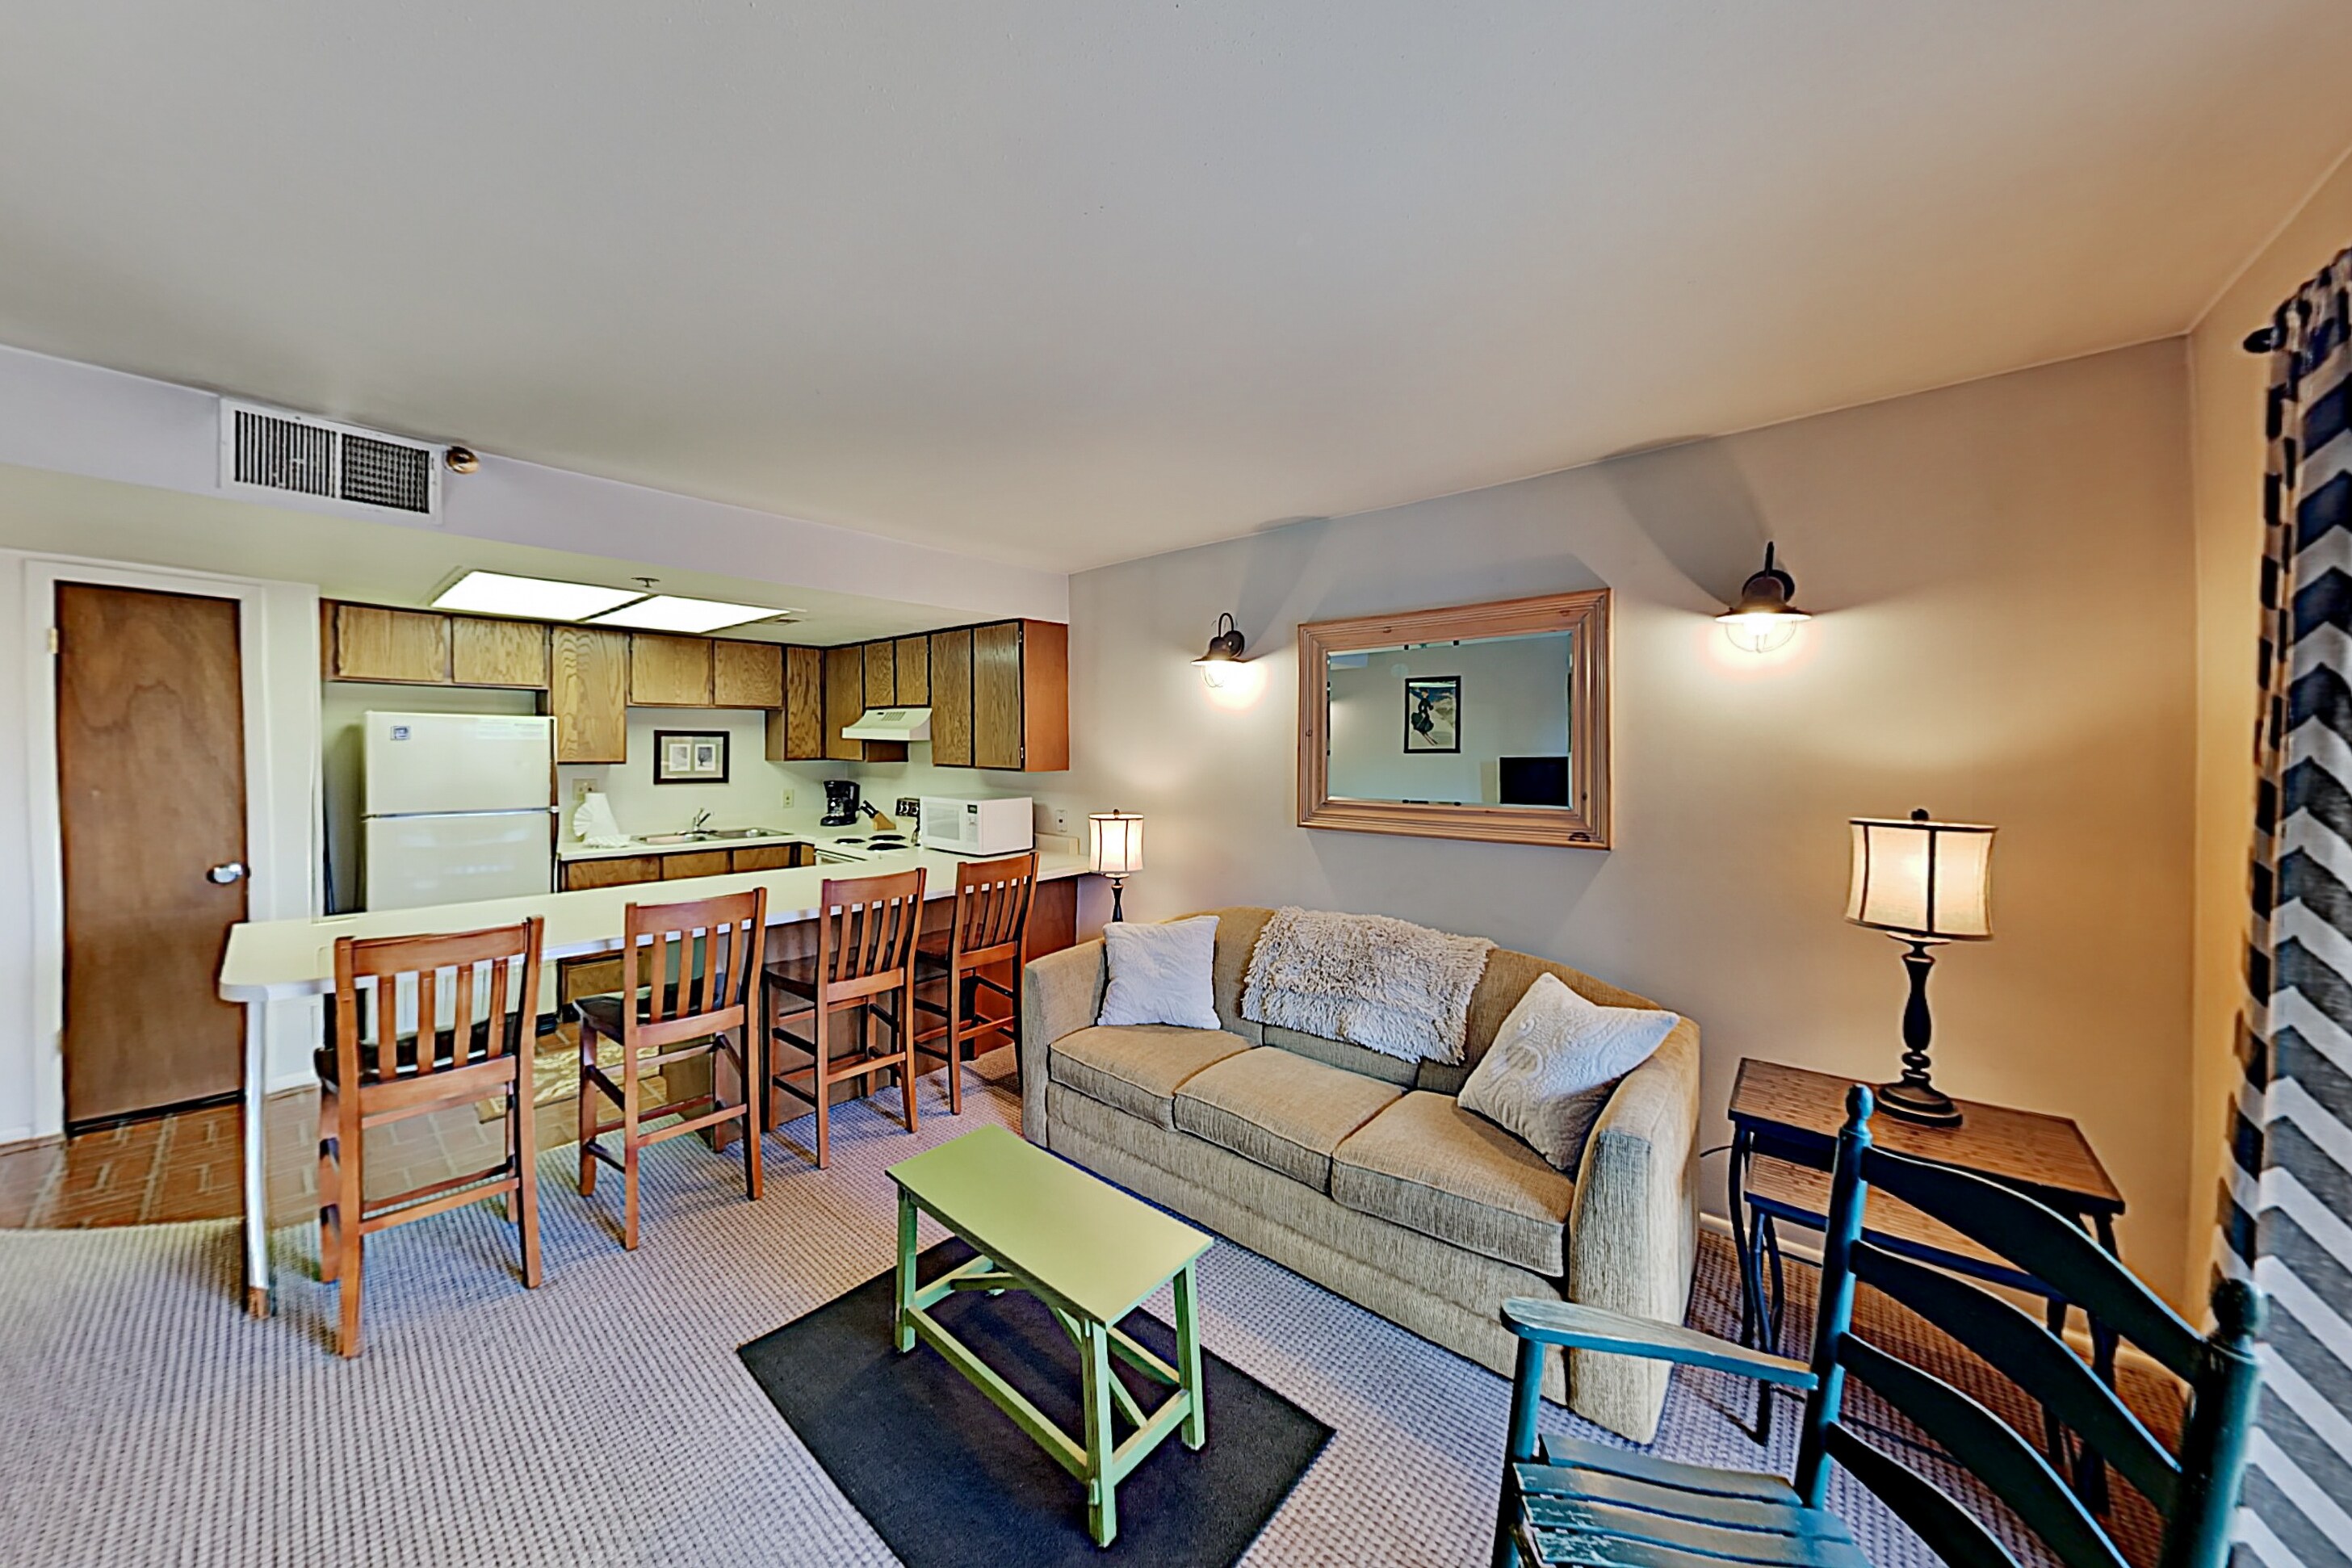 Welcome to Park City! This Powder Pointe condo is professionally managed by TurnKey Vacation Rentals.